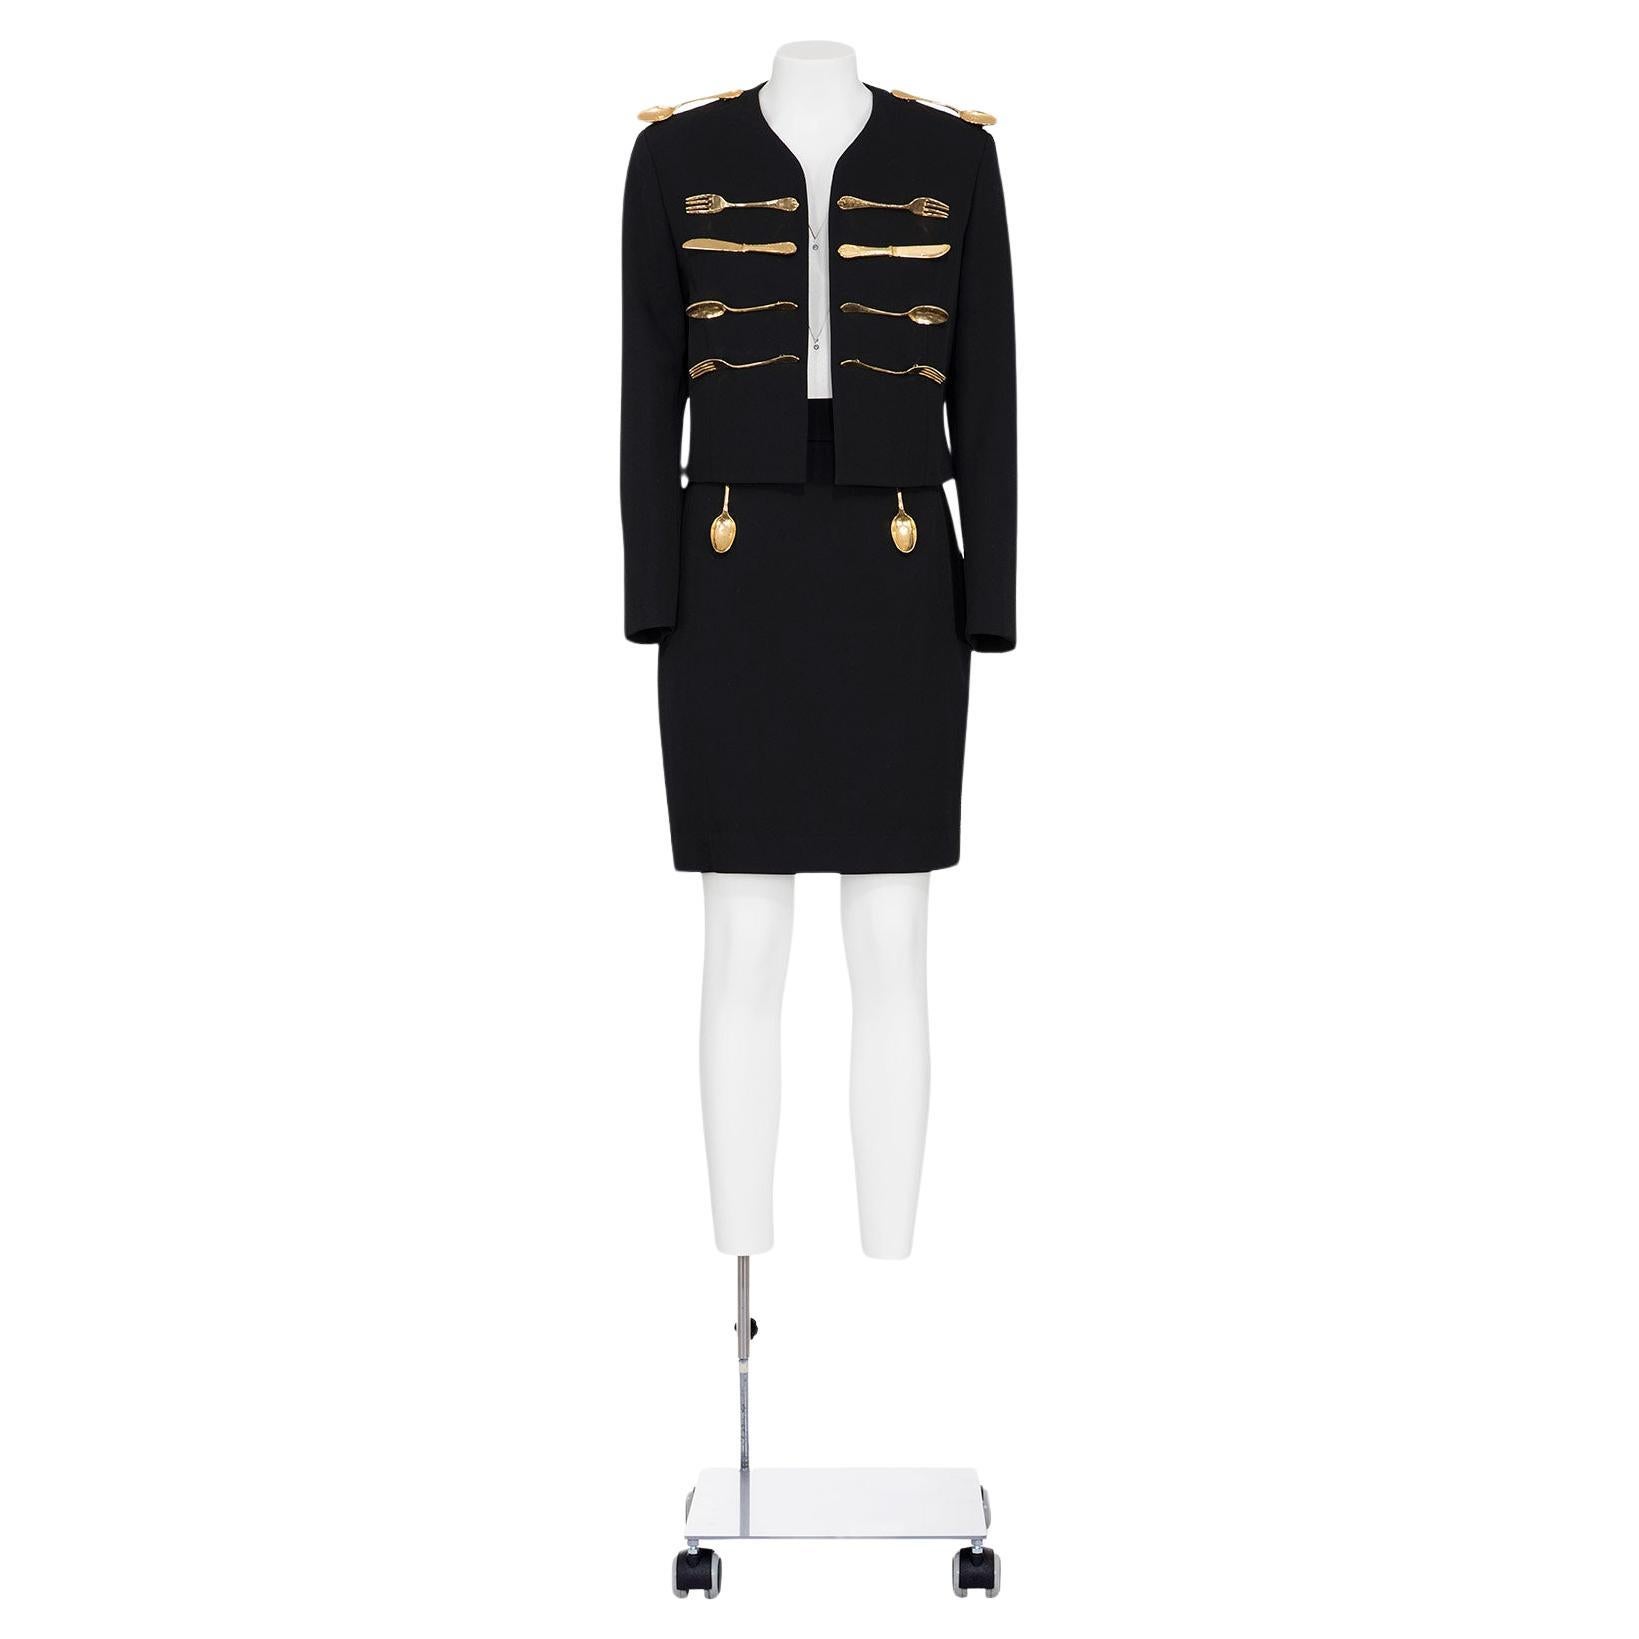 MOSCHINO SS 94 Iconic and Rare Cutlery Dinner Suit For Sale